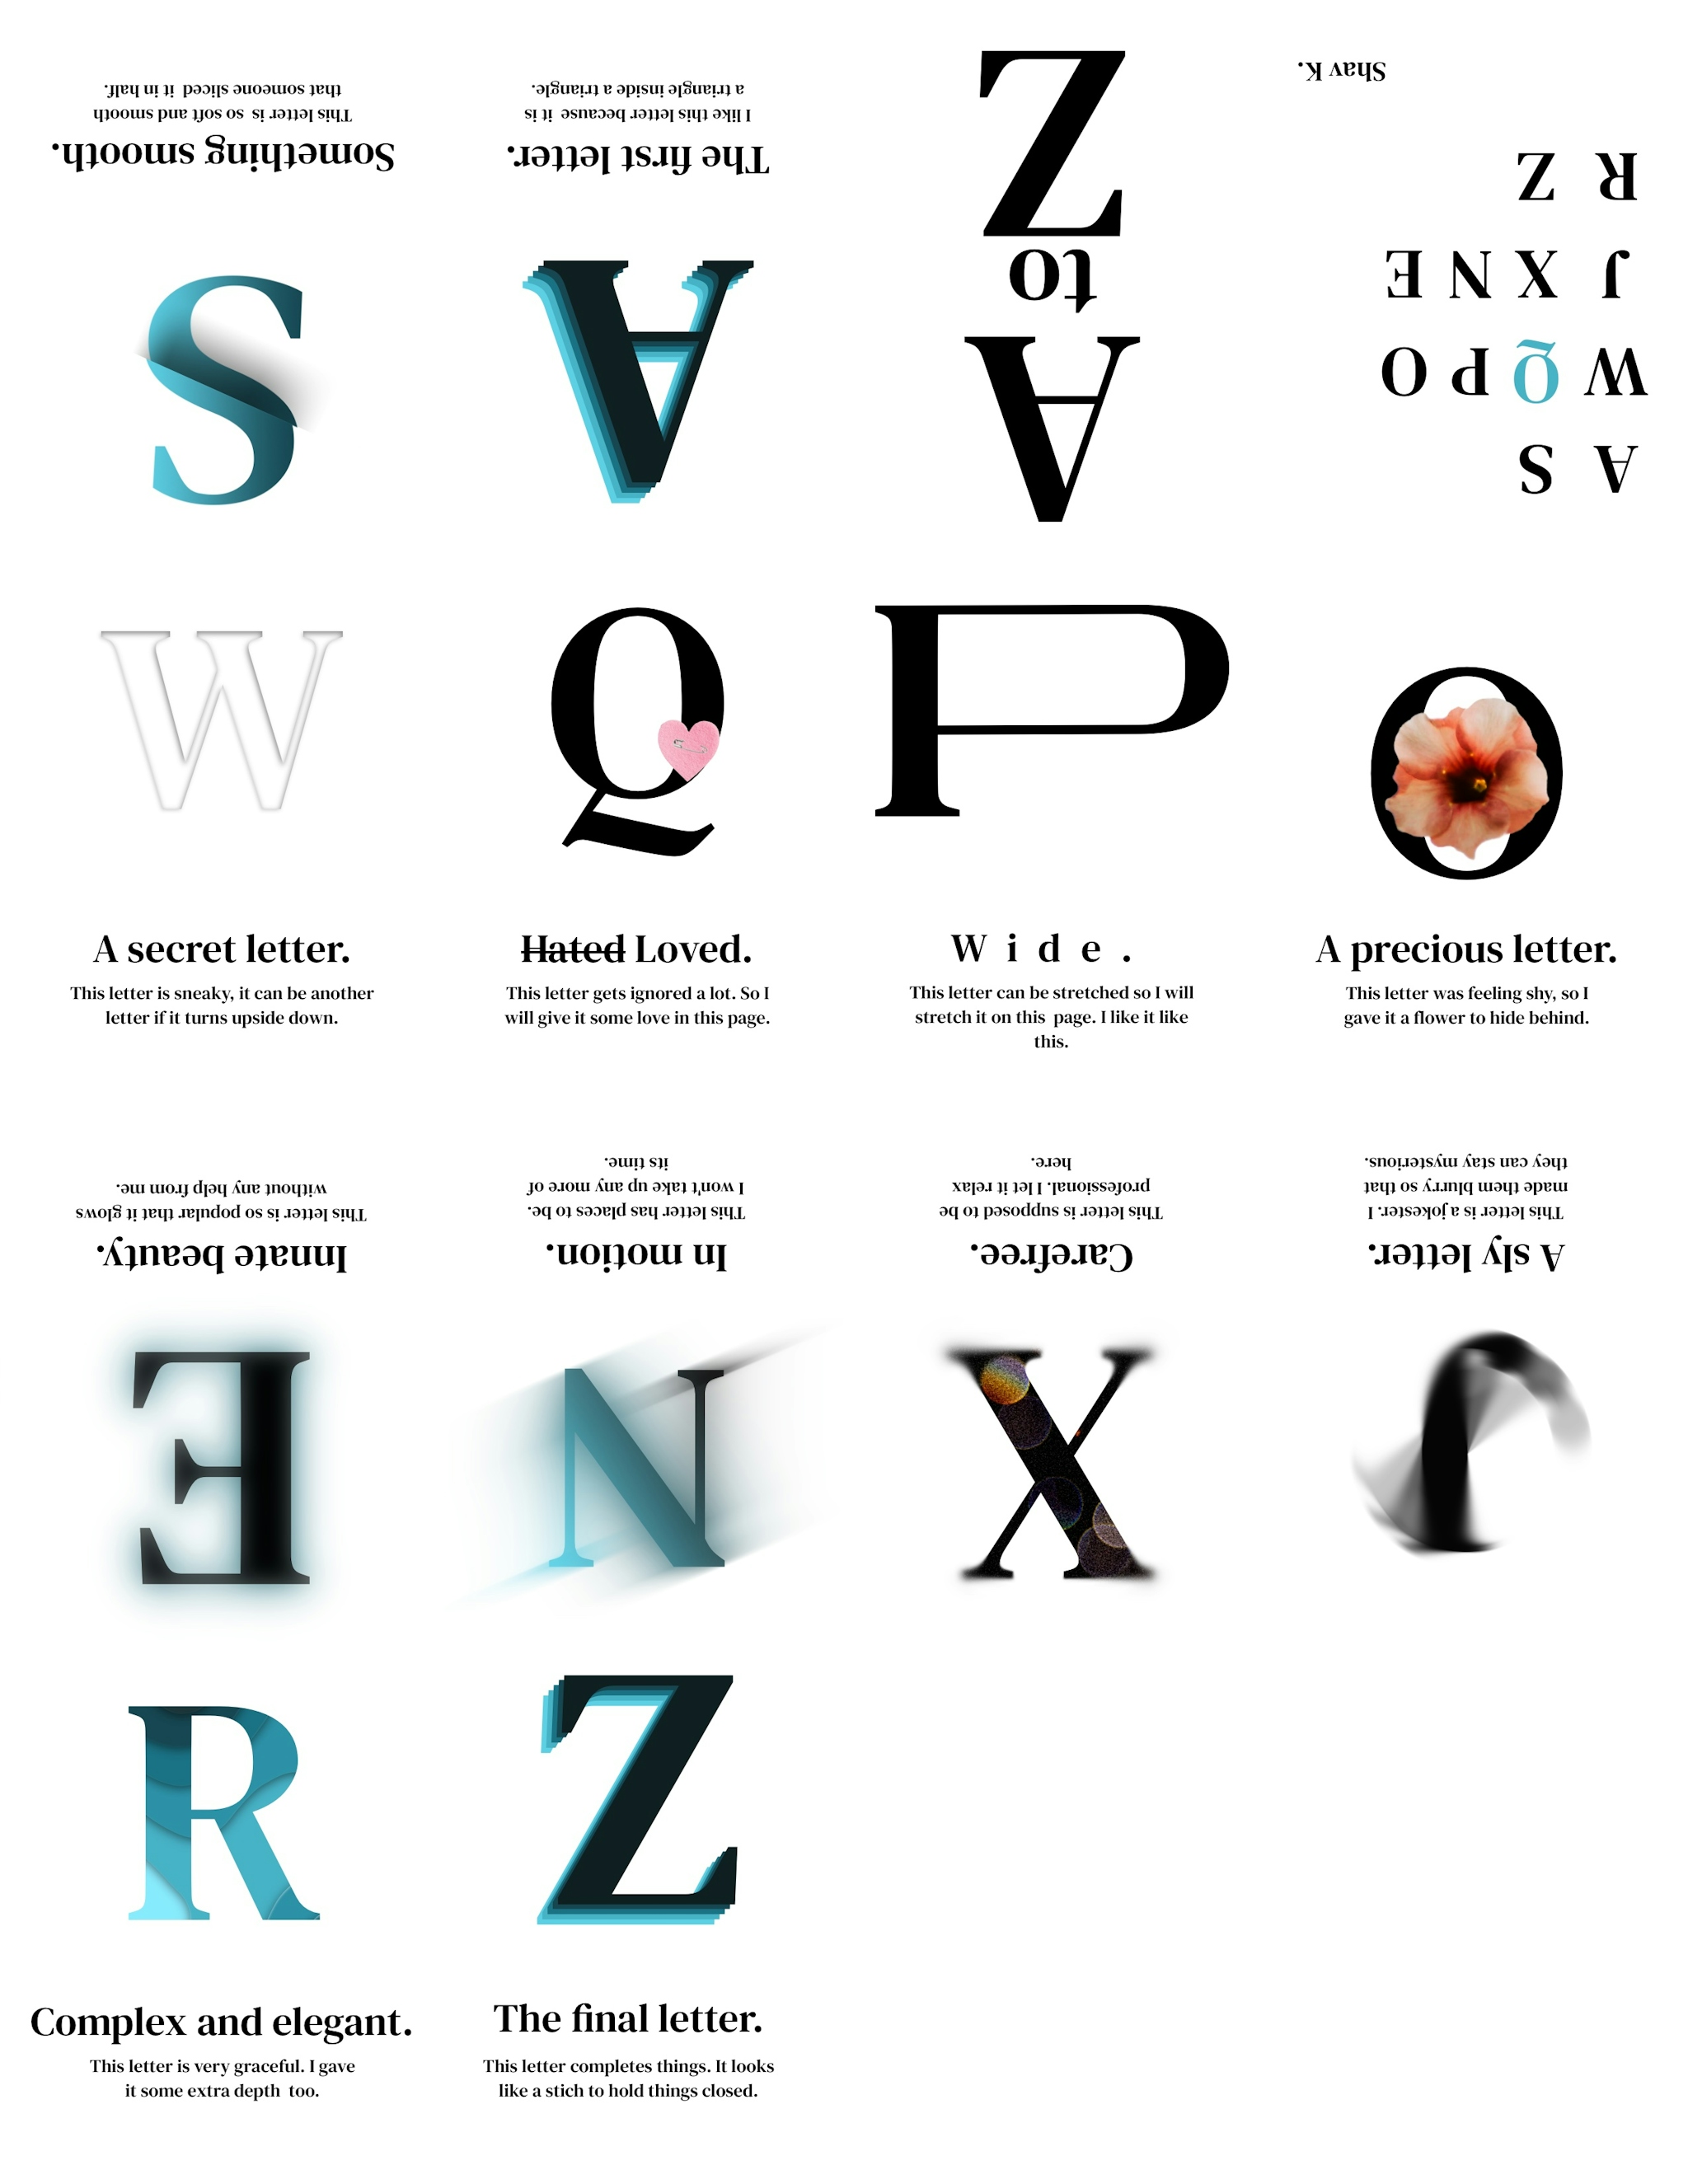 A collage featuring different letters of the alphabet.